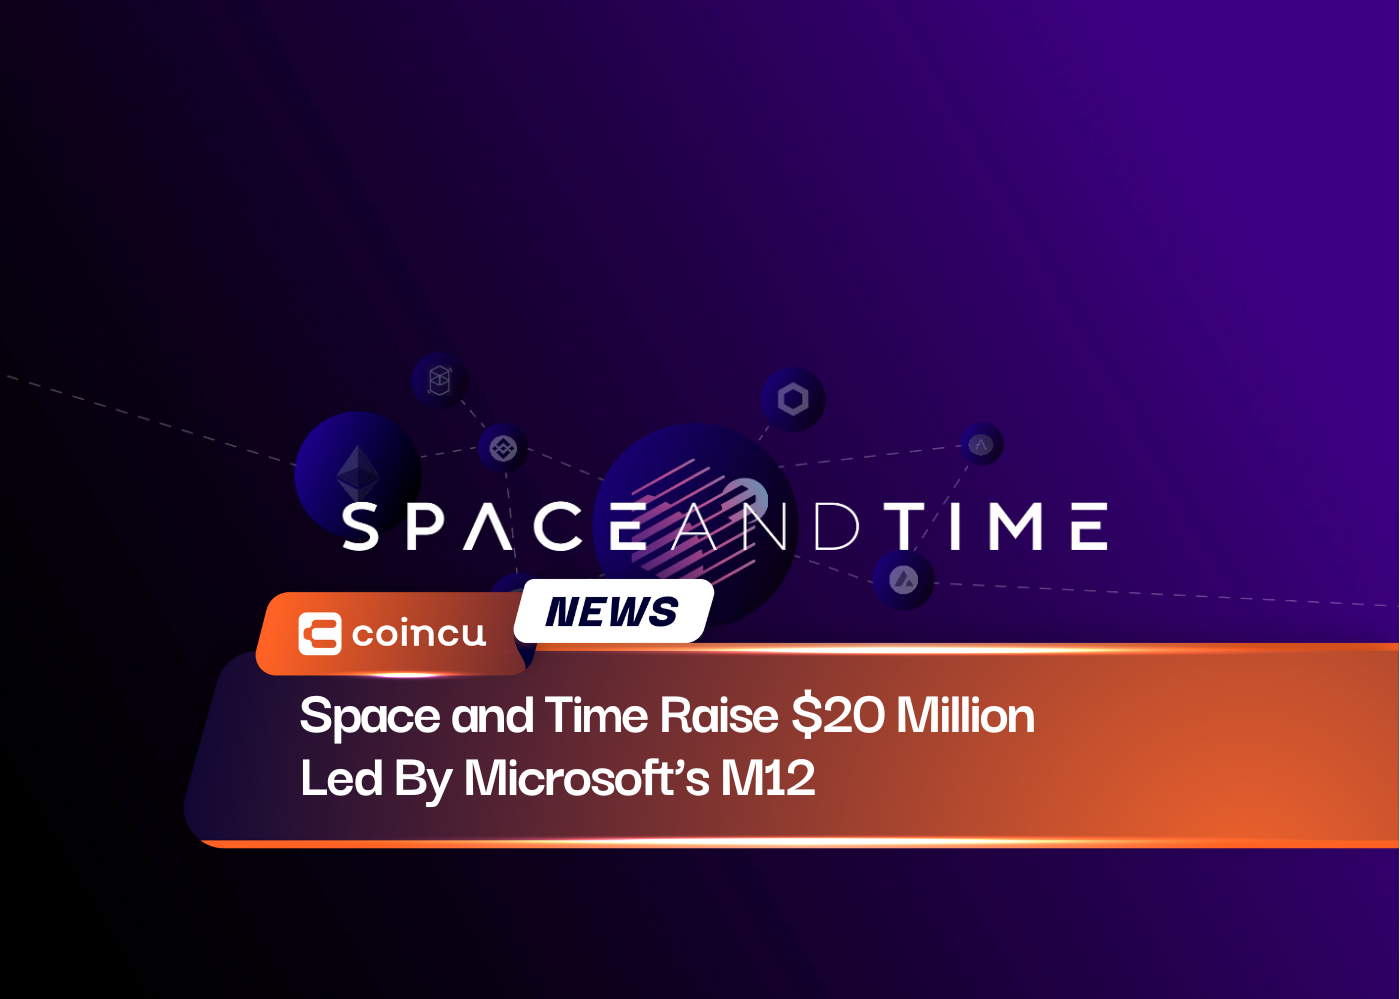 Space and Time Raise $20 Million Led By Microsoft’s M12